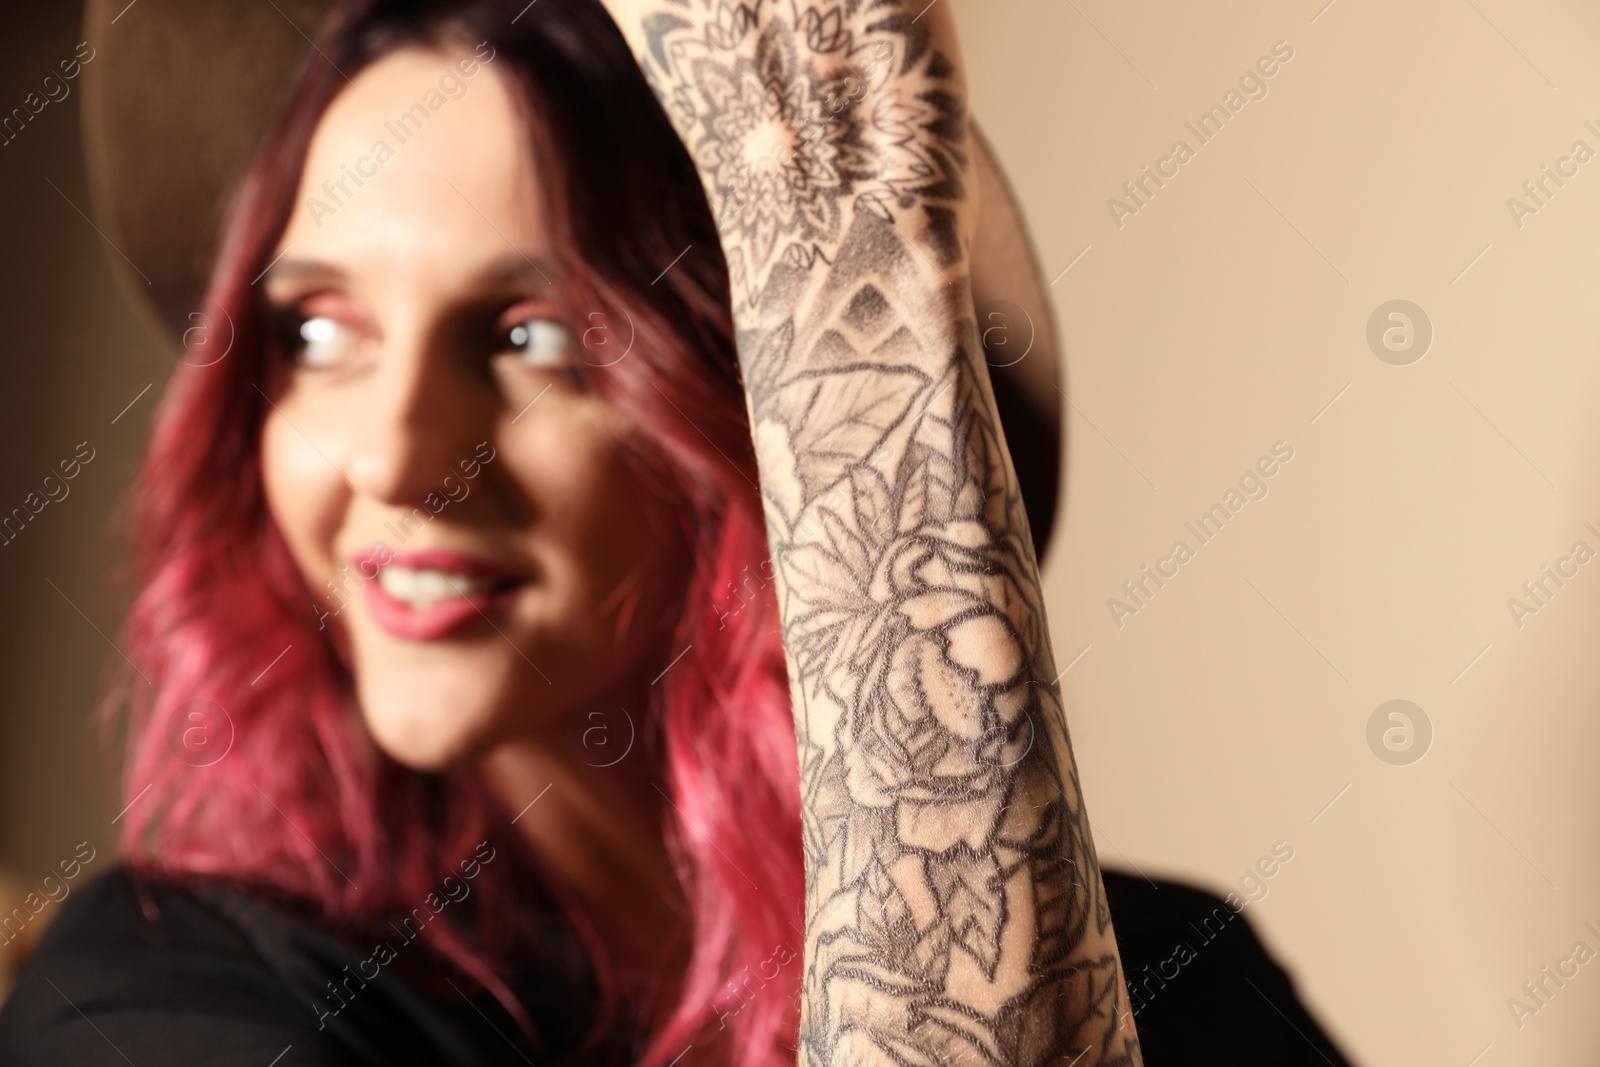 Photo of Beautiful woman with tattoos on arm against beige background, focus on hand